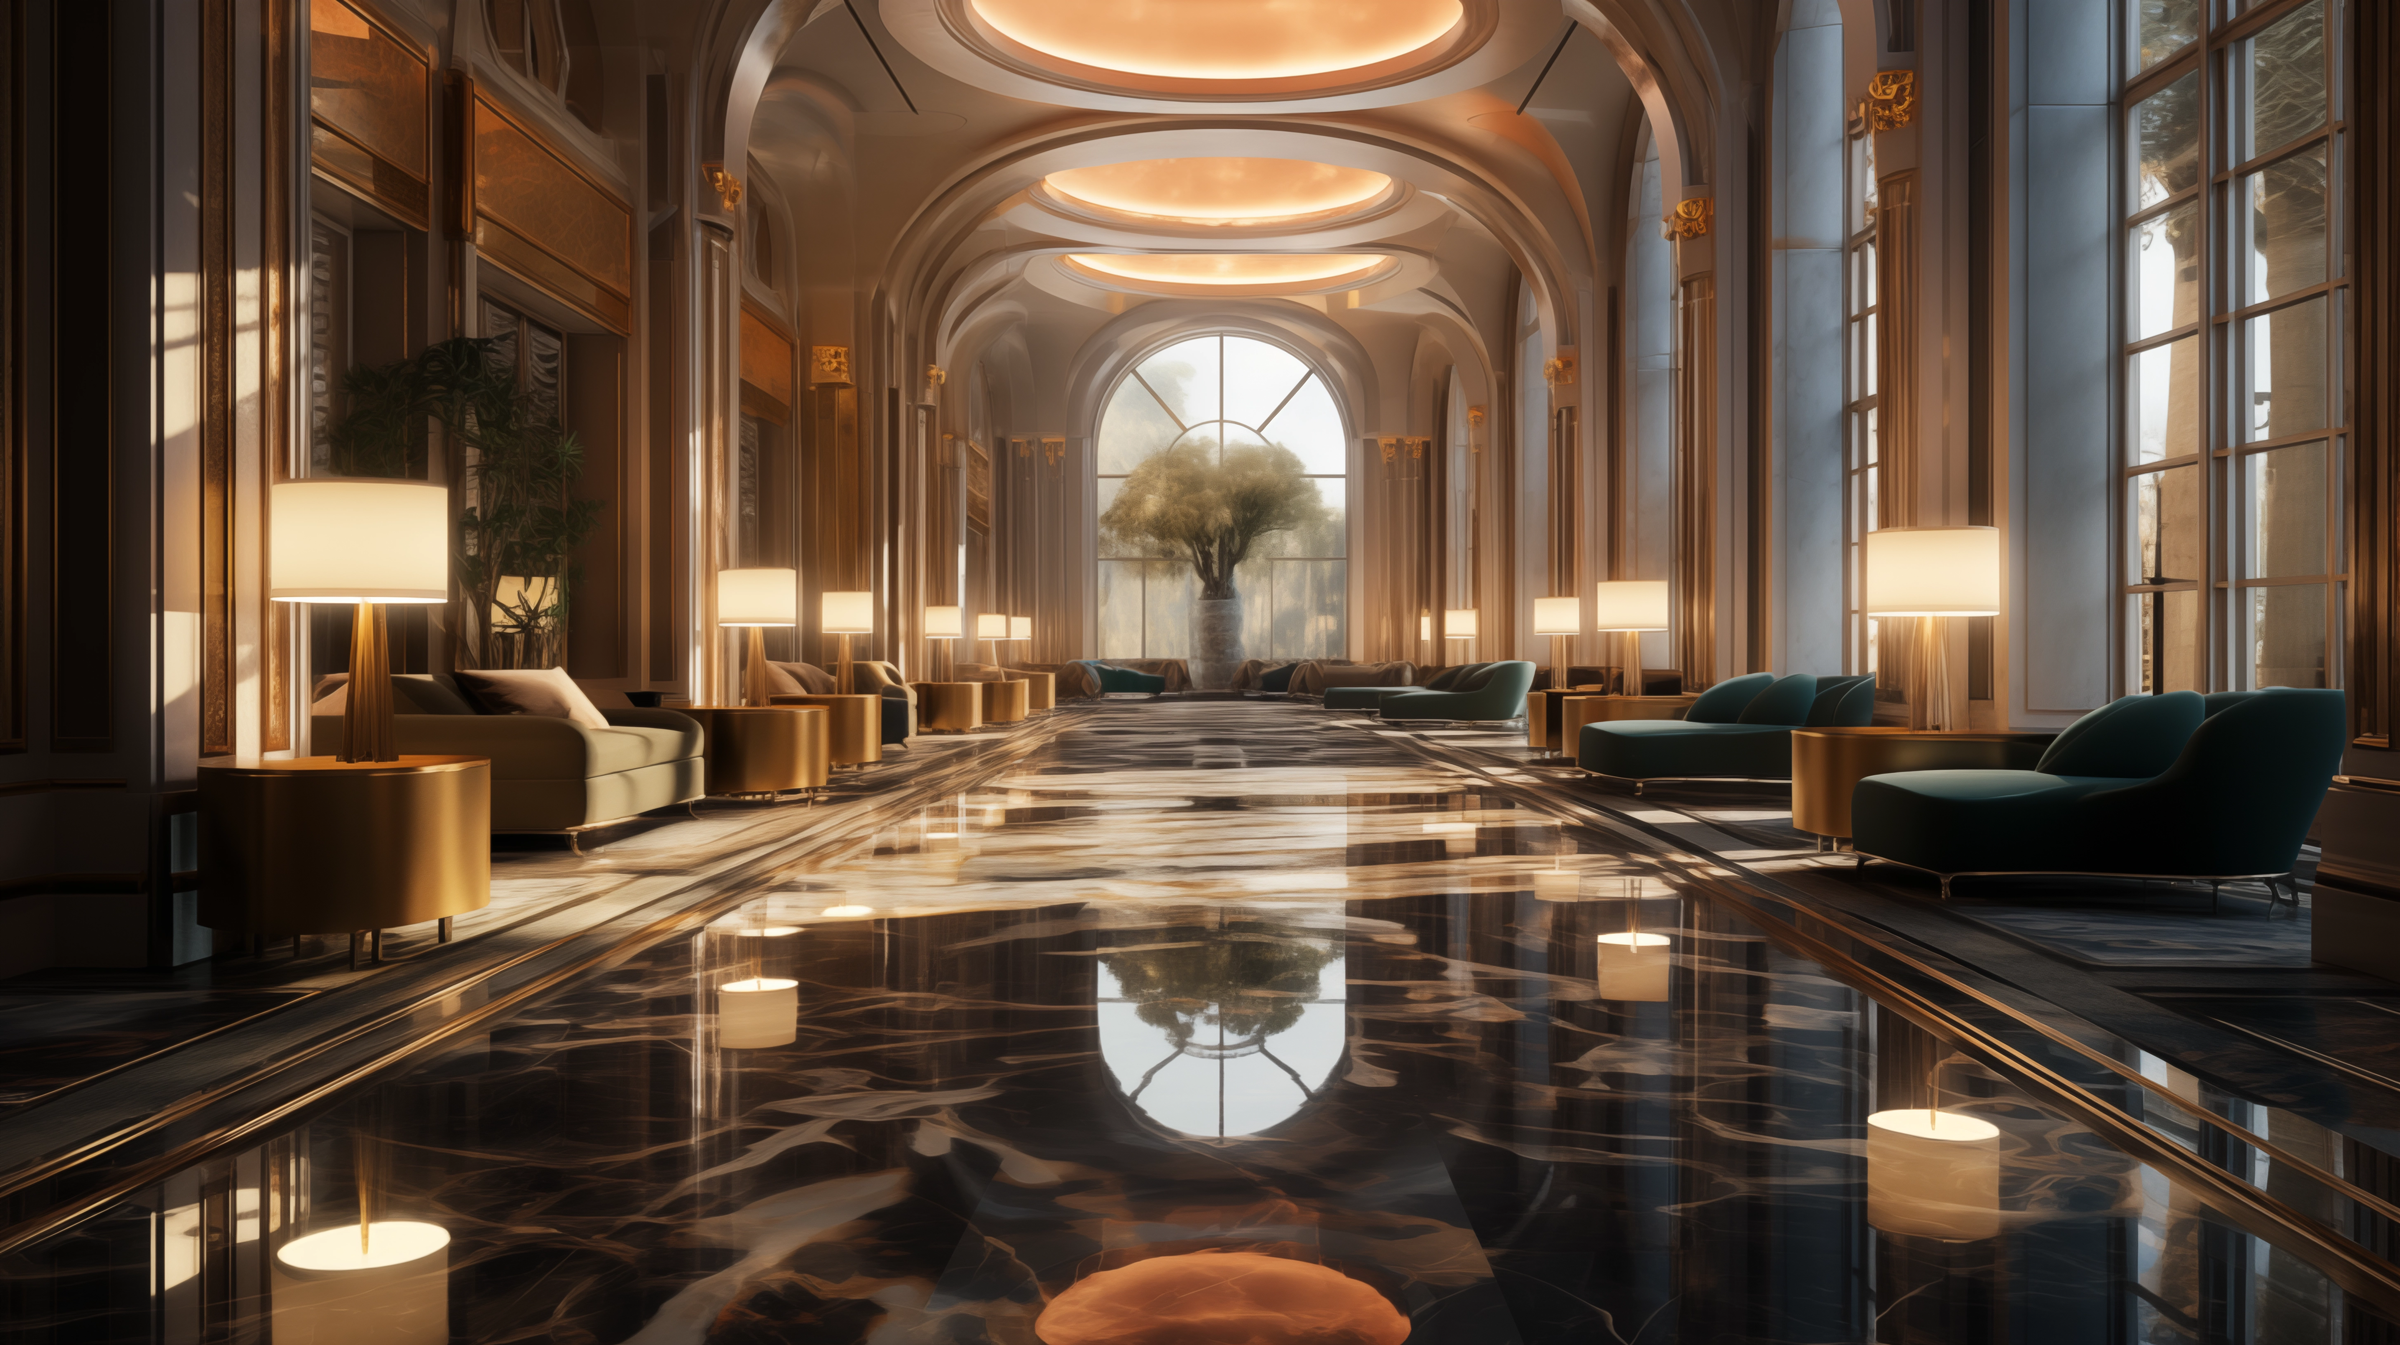 Luxury hotel lobby with highly polished stone floors and walls, featuring elegant furniture, warm lighting, and a sophisticated atmosphere. The reflective surfaces create a glamorous ambiance.